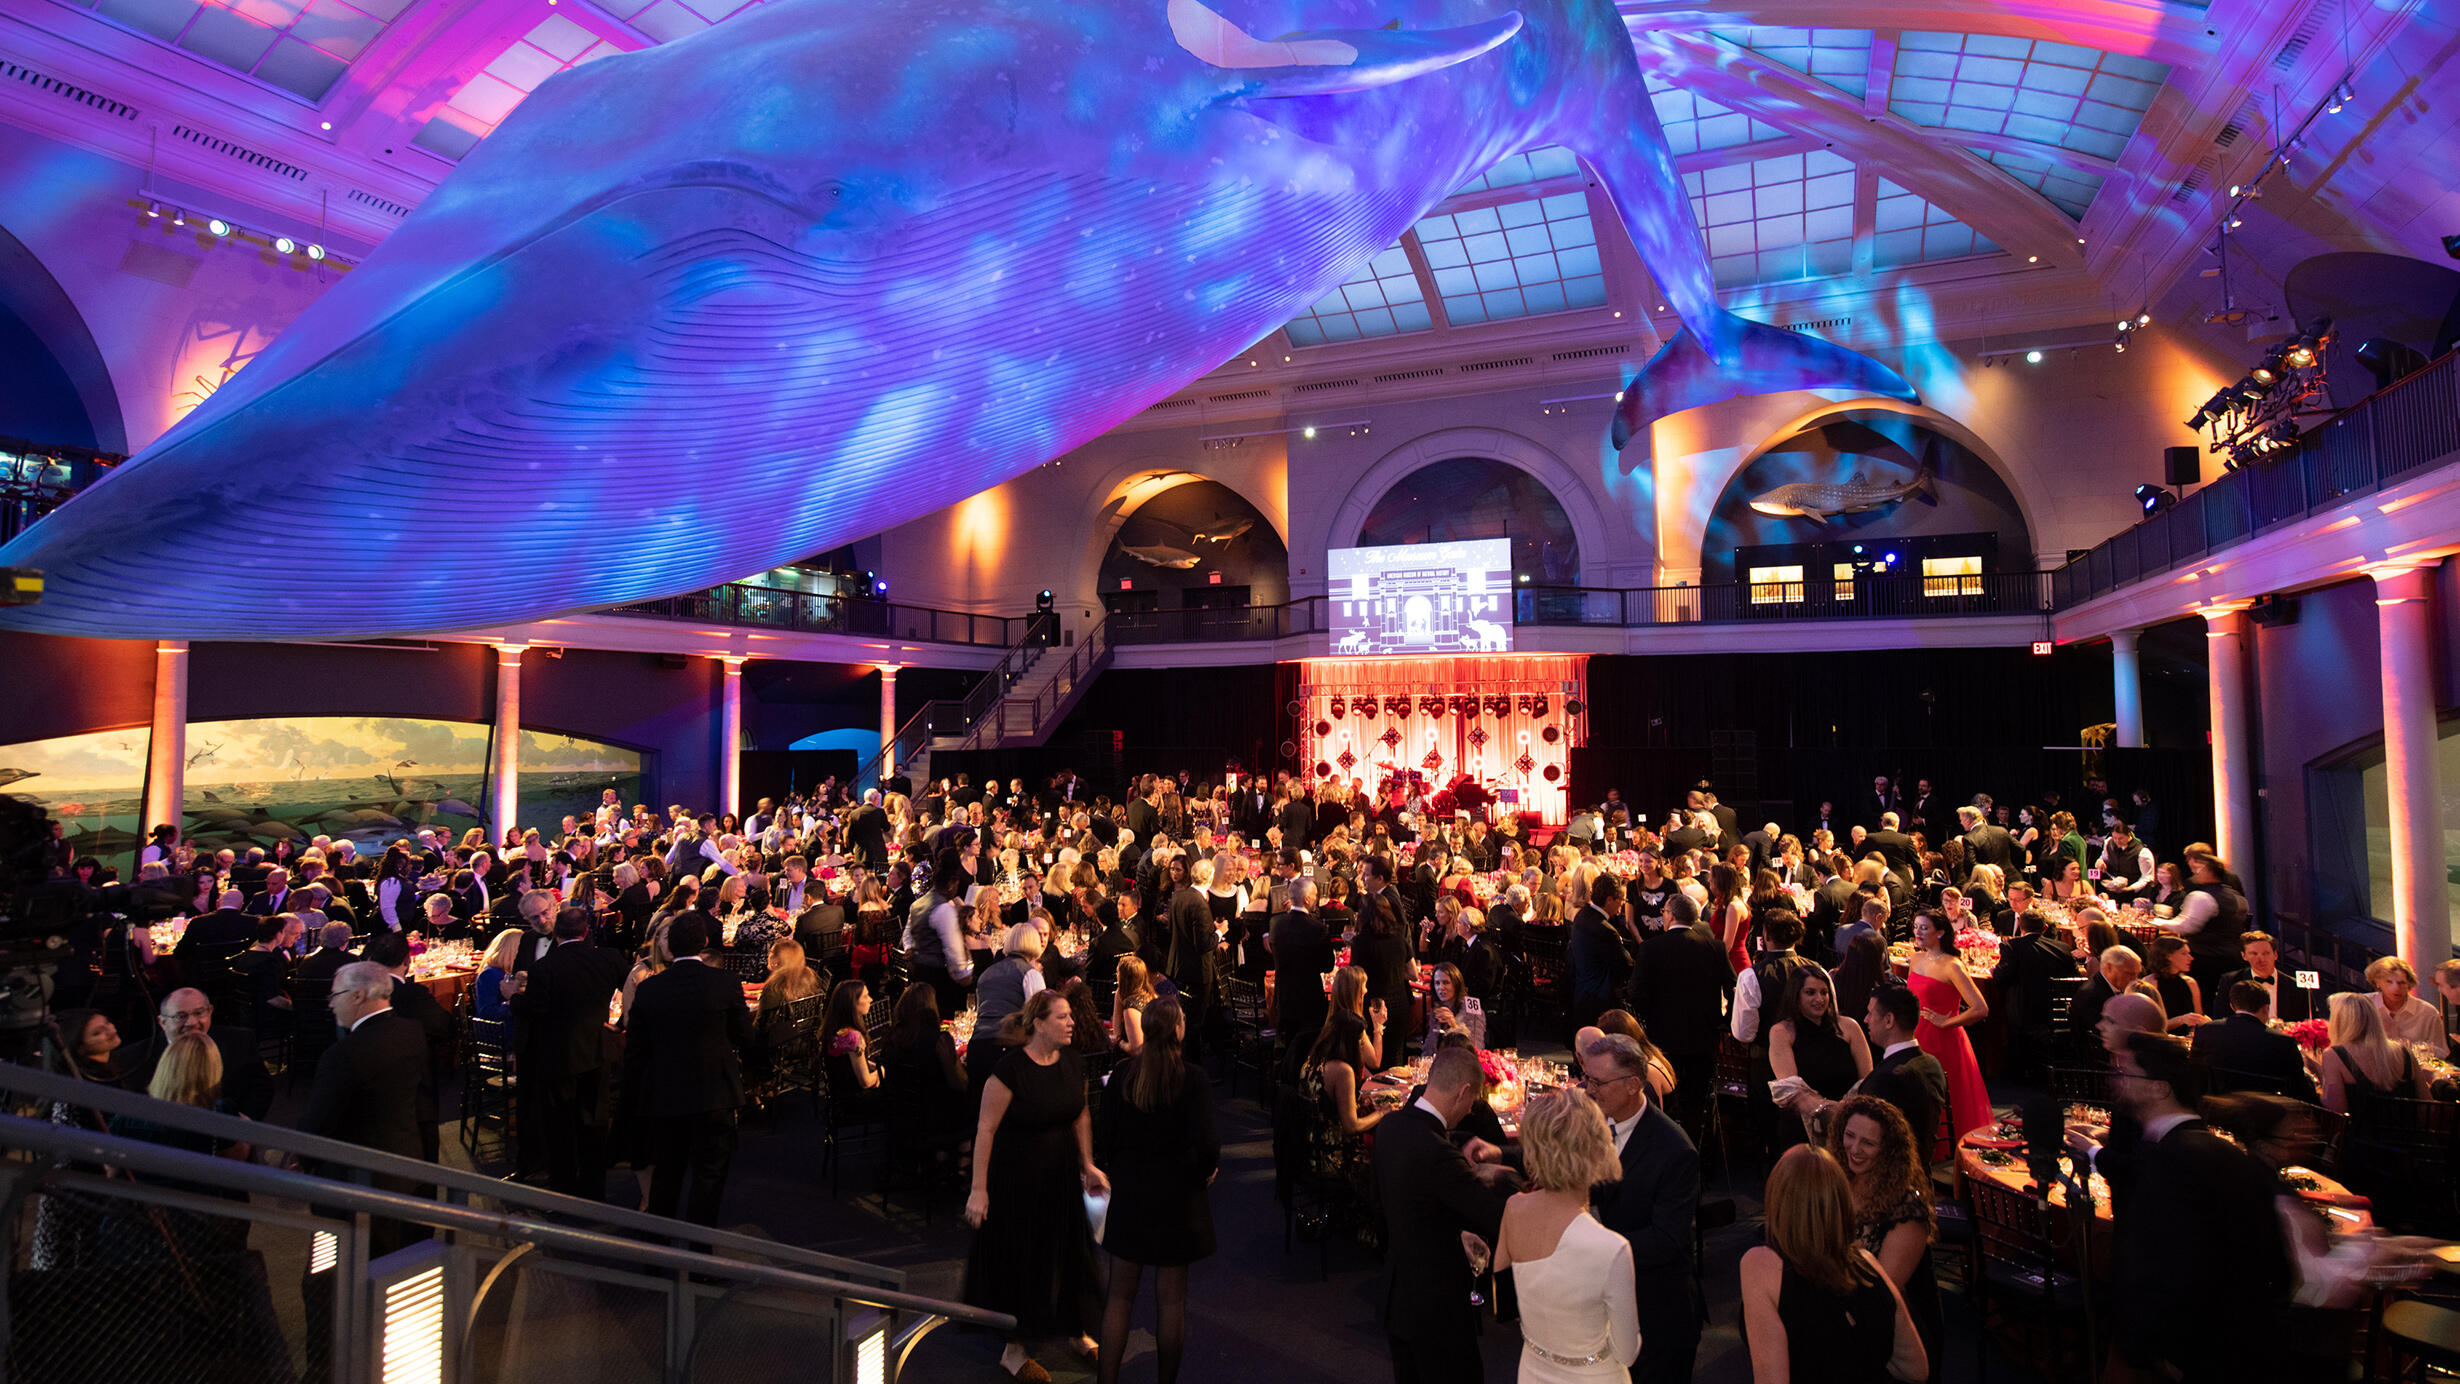 Attendees at the American Museum of Natural History's annual gala. Guests are dining at tables under the iconic blue whale model.